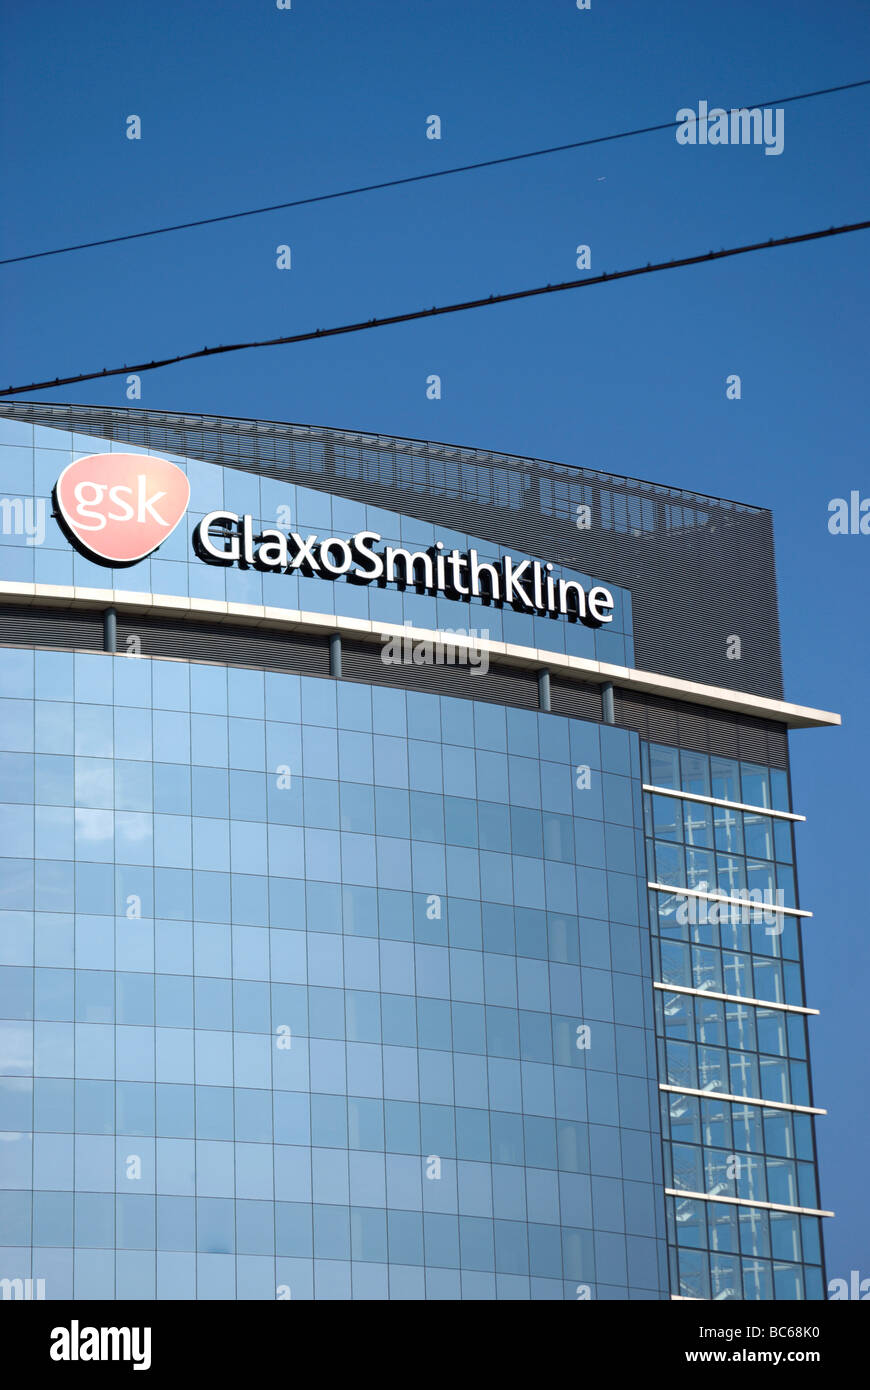 exterior detail of  world headquarters of pharmaceutical company gsk, glaxosmithkline, showing company logo, in london, england Stock Photo